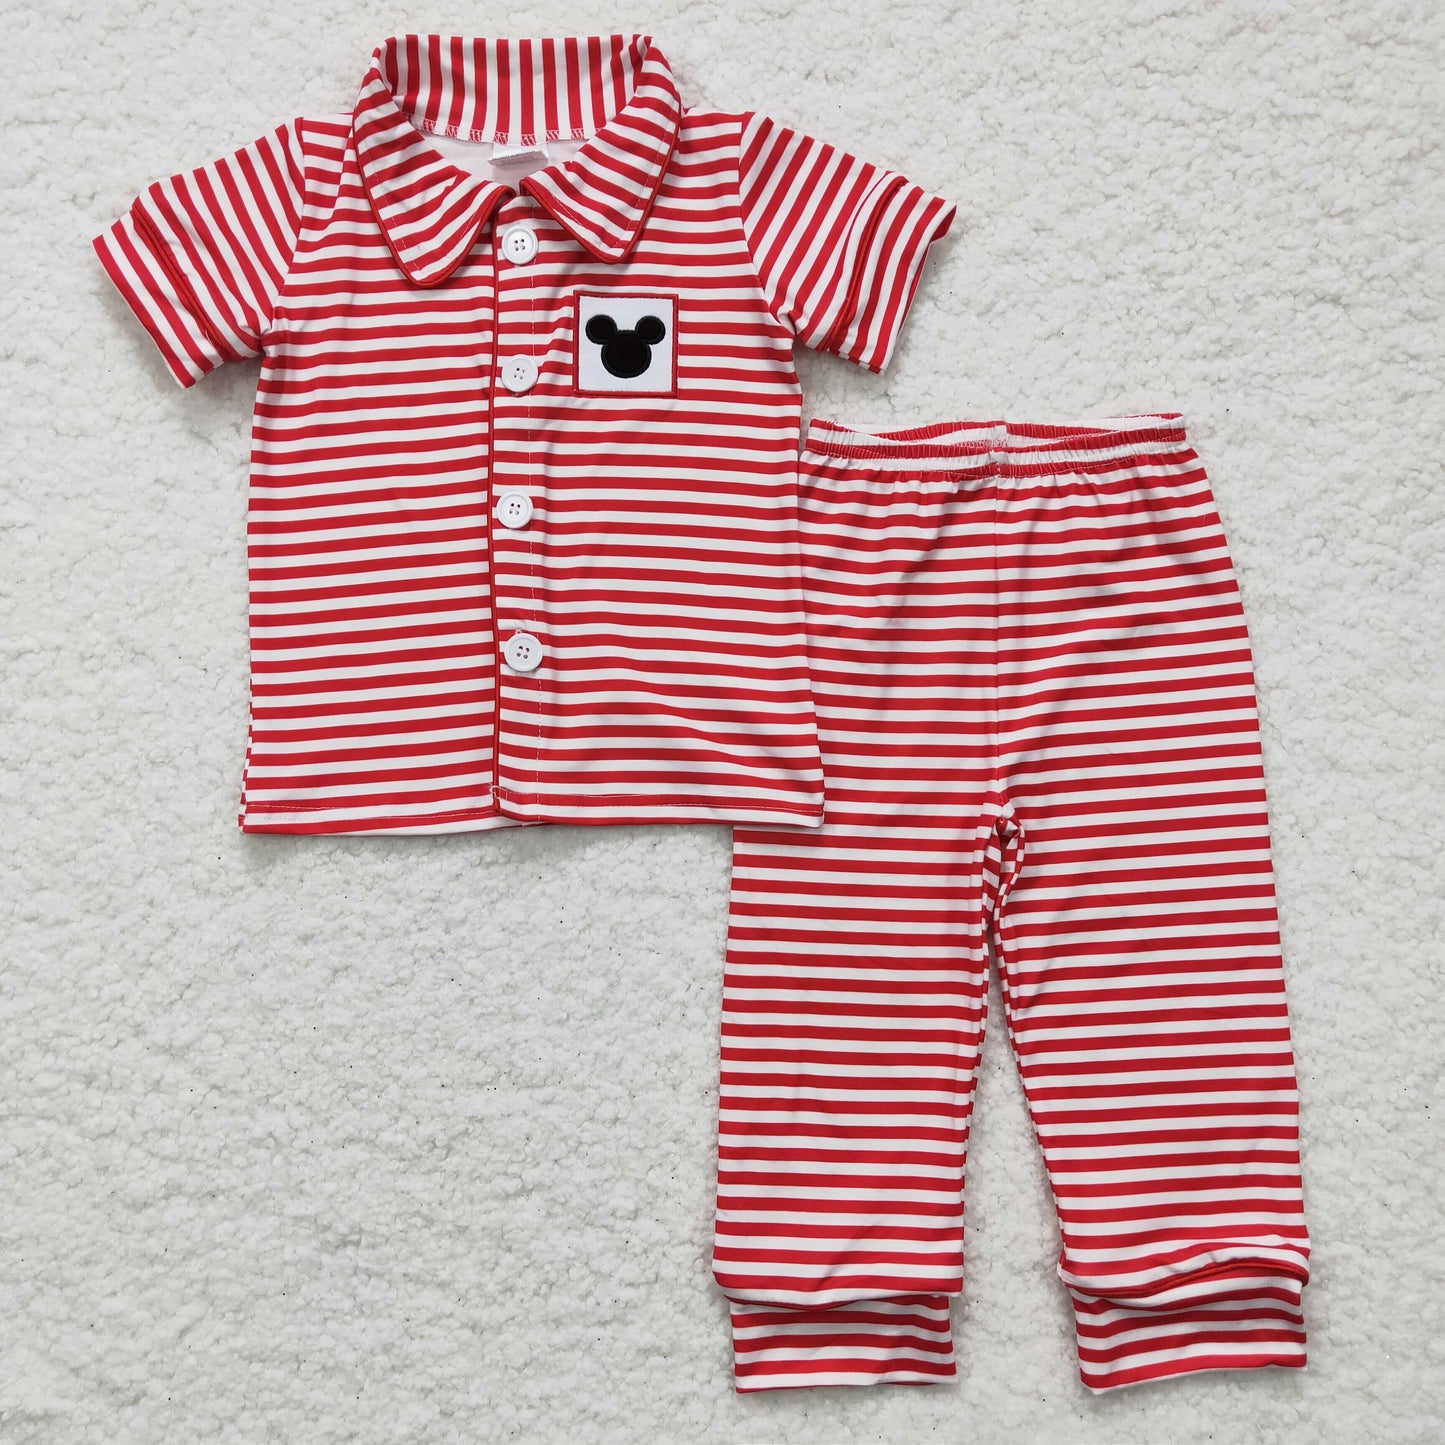 embroidery red stripe boys pajama outfit